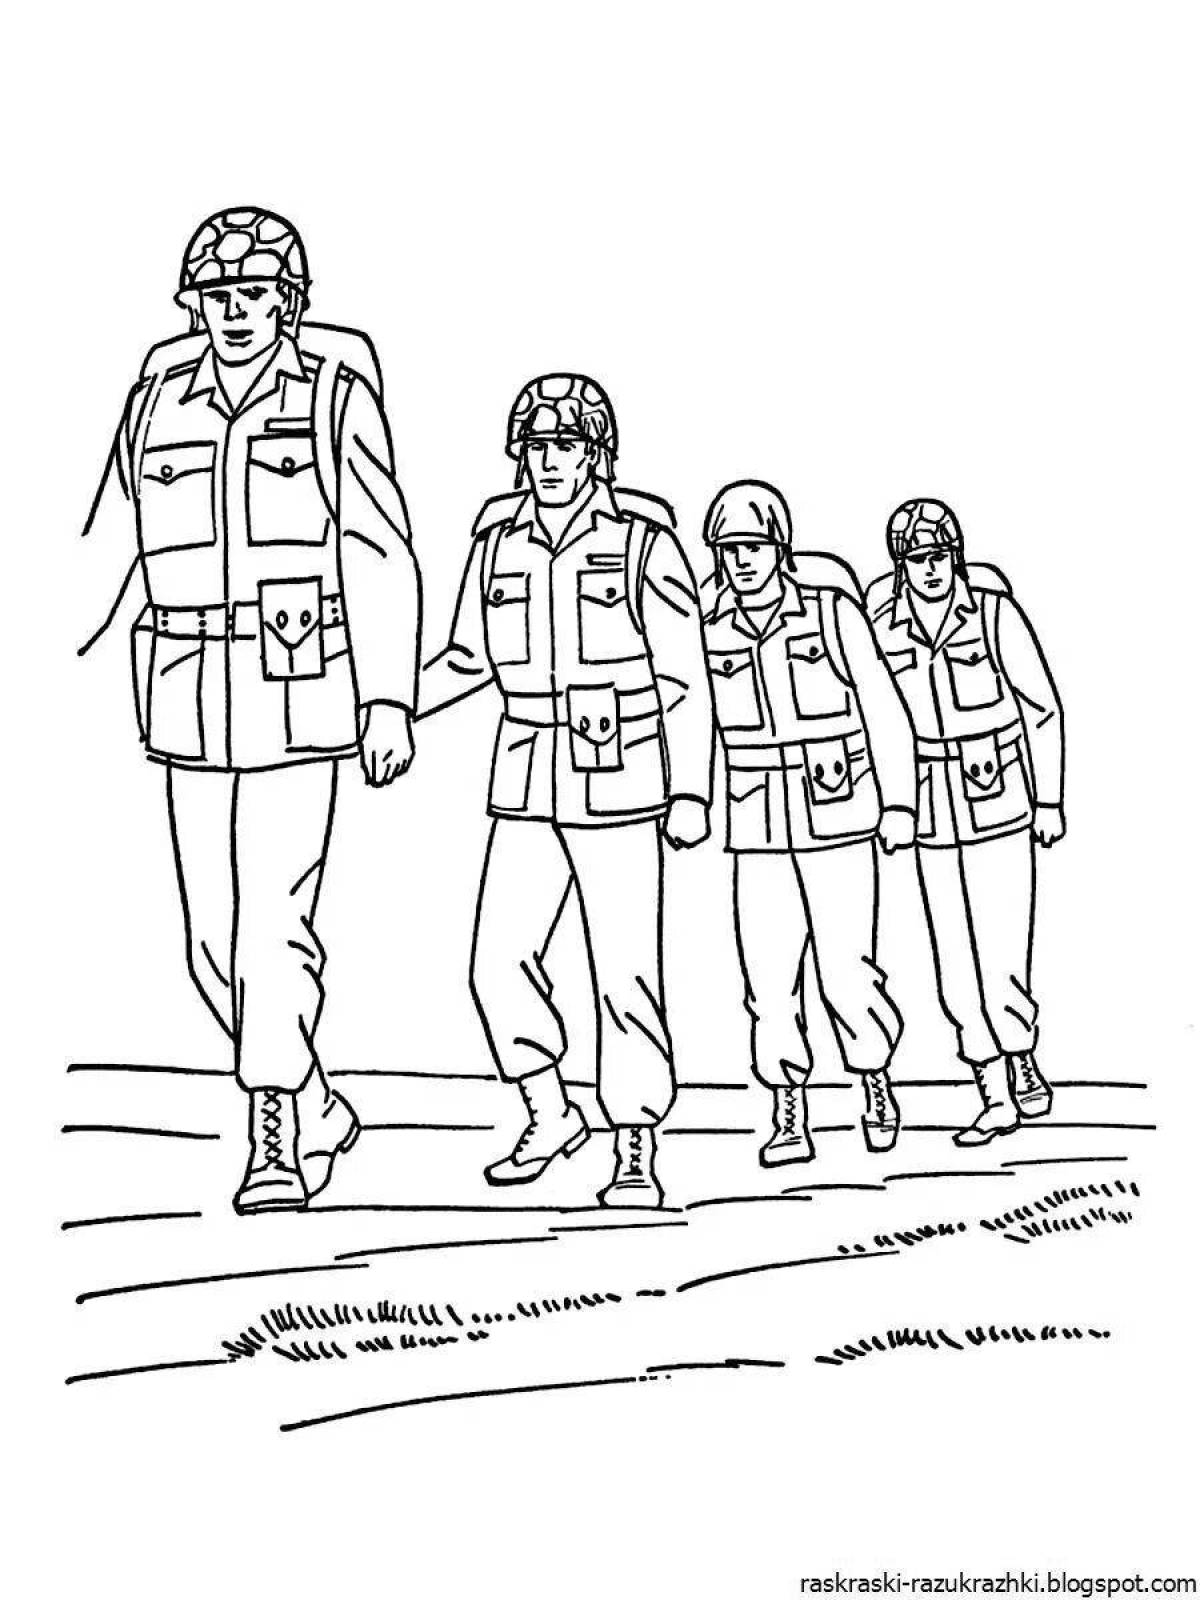 Bold military uniform coloring page